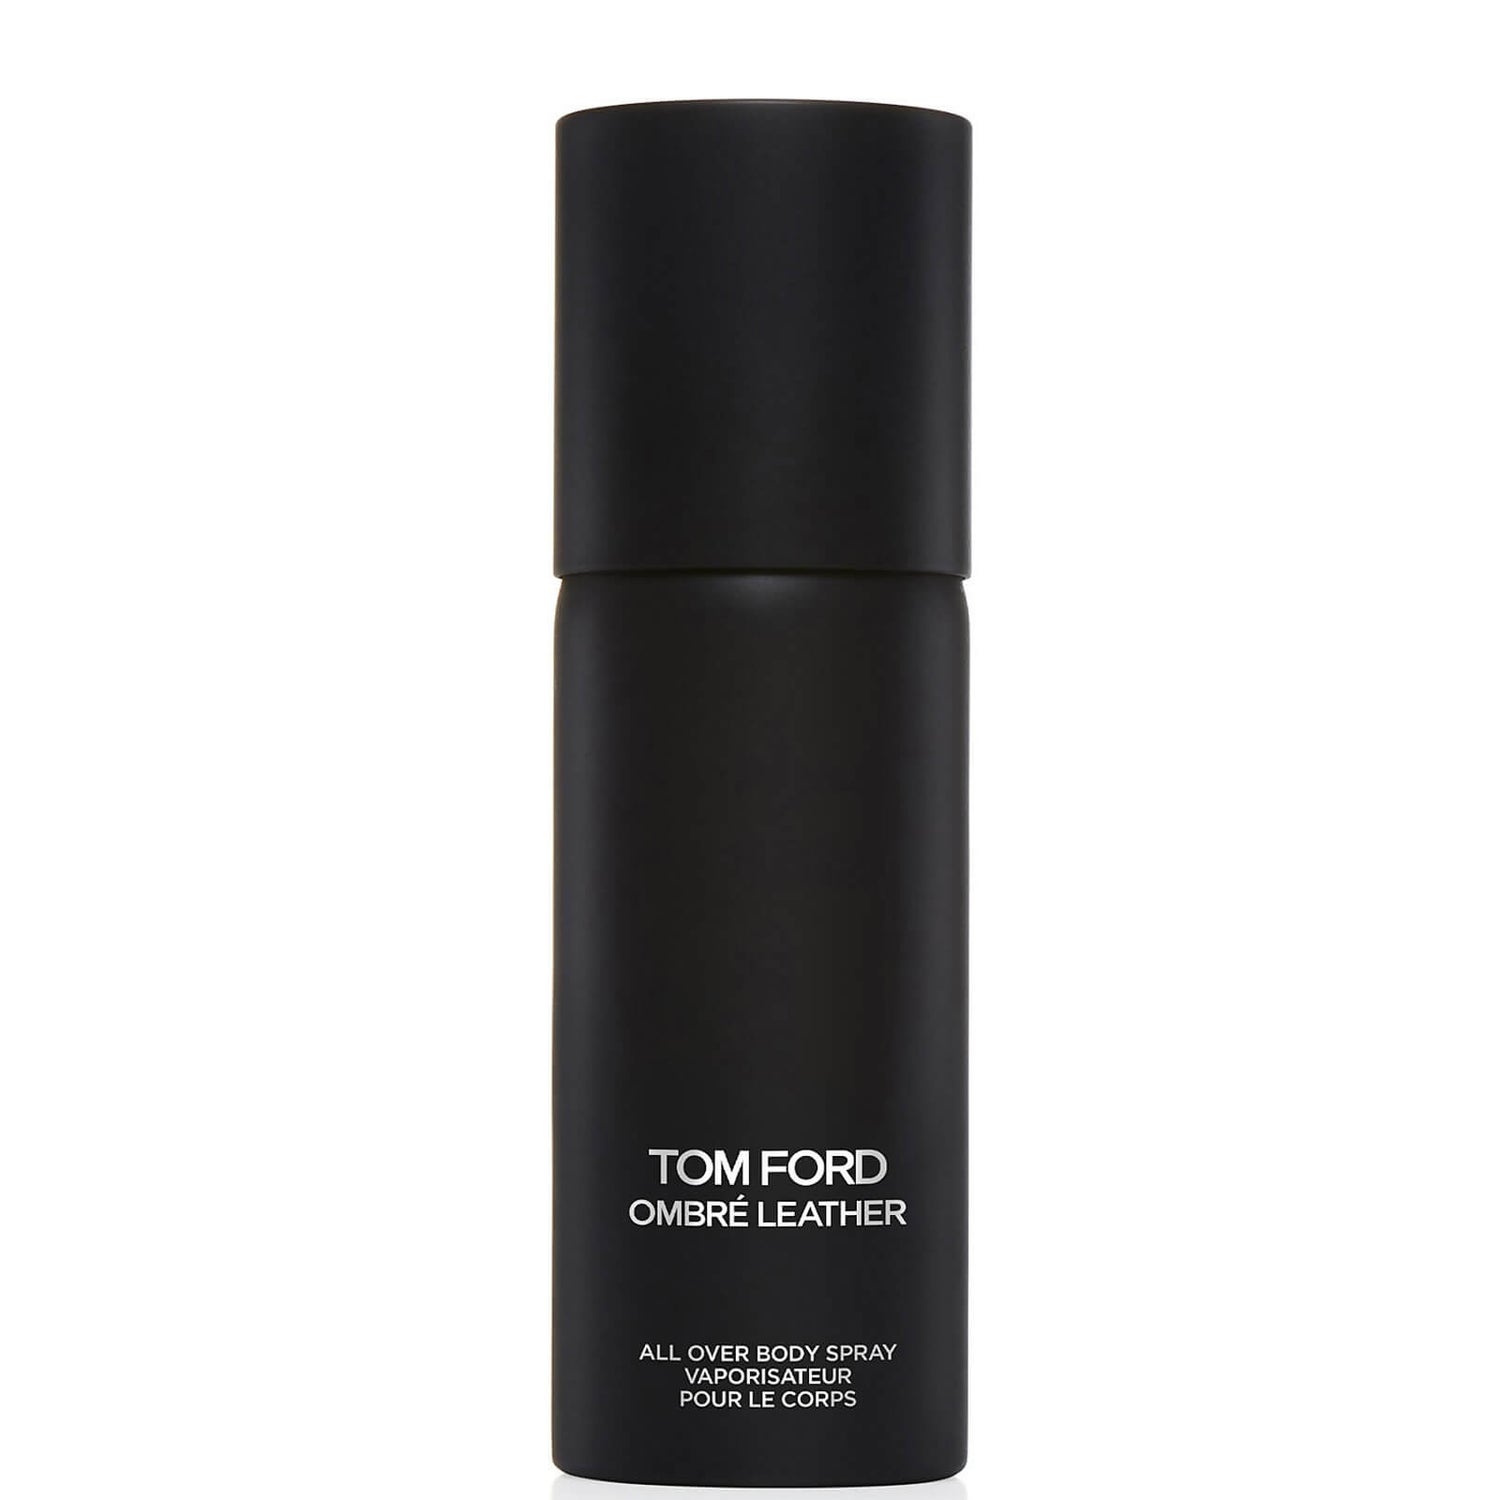 Tom Ford Ombre Leather All Over Body Spray 150ml - LOOKFANTASTIC